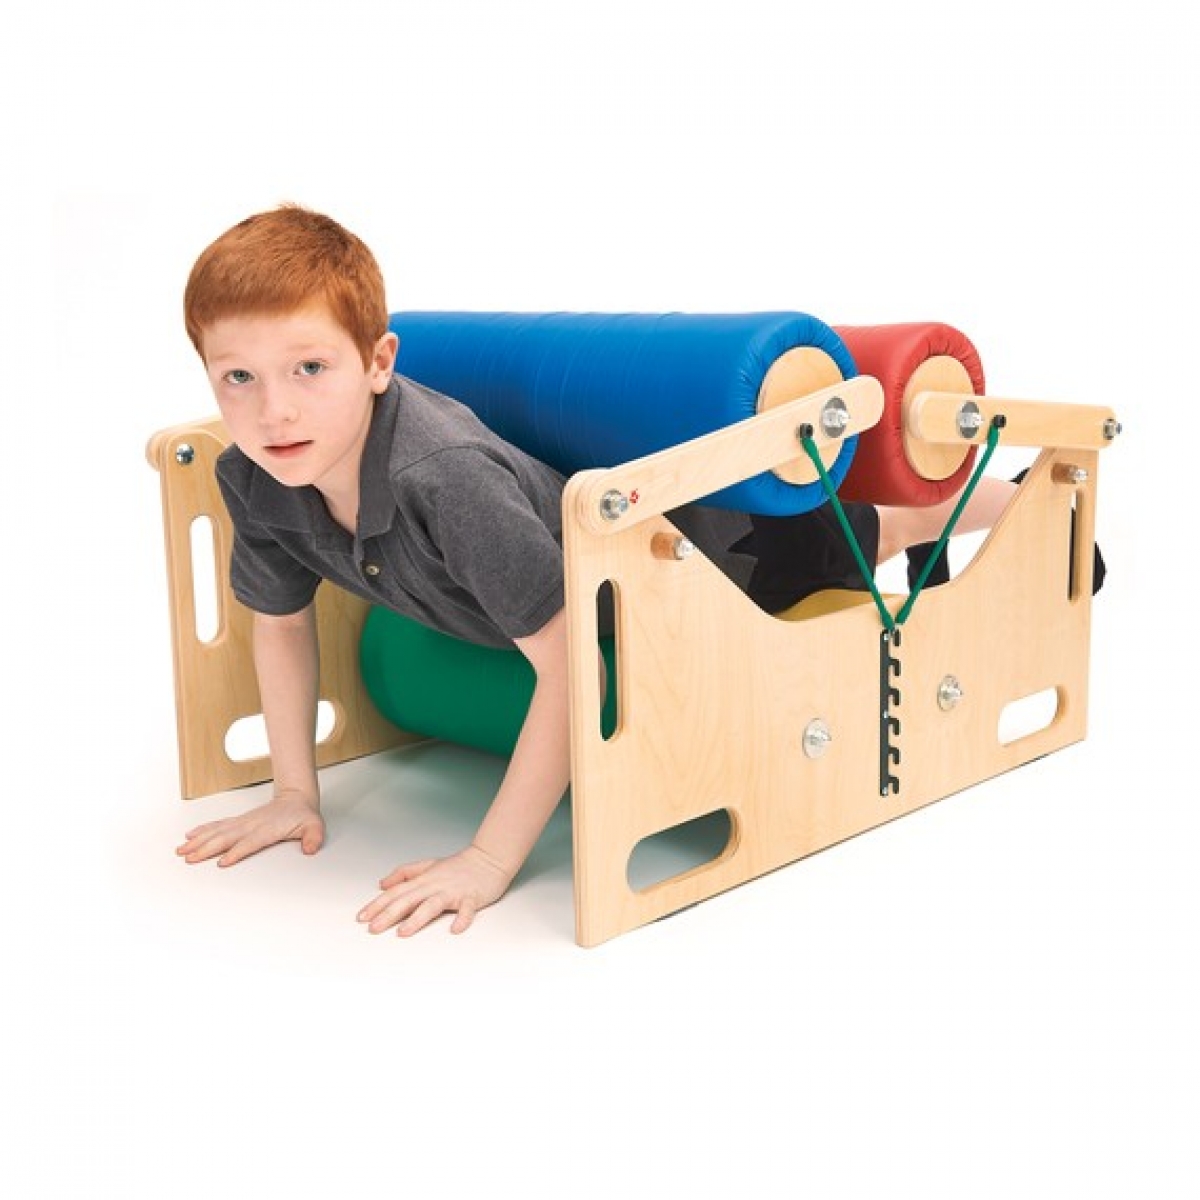 https://www.autism-products.com/wp-content/uploads/Autism-Steam-Roller-1200x1200.jpg